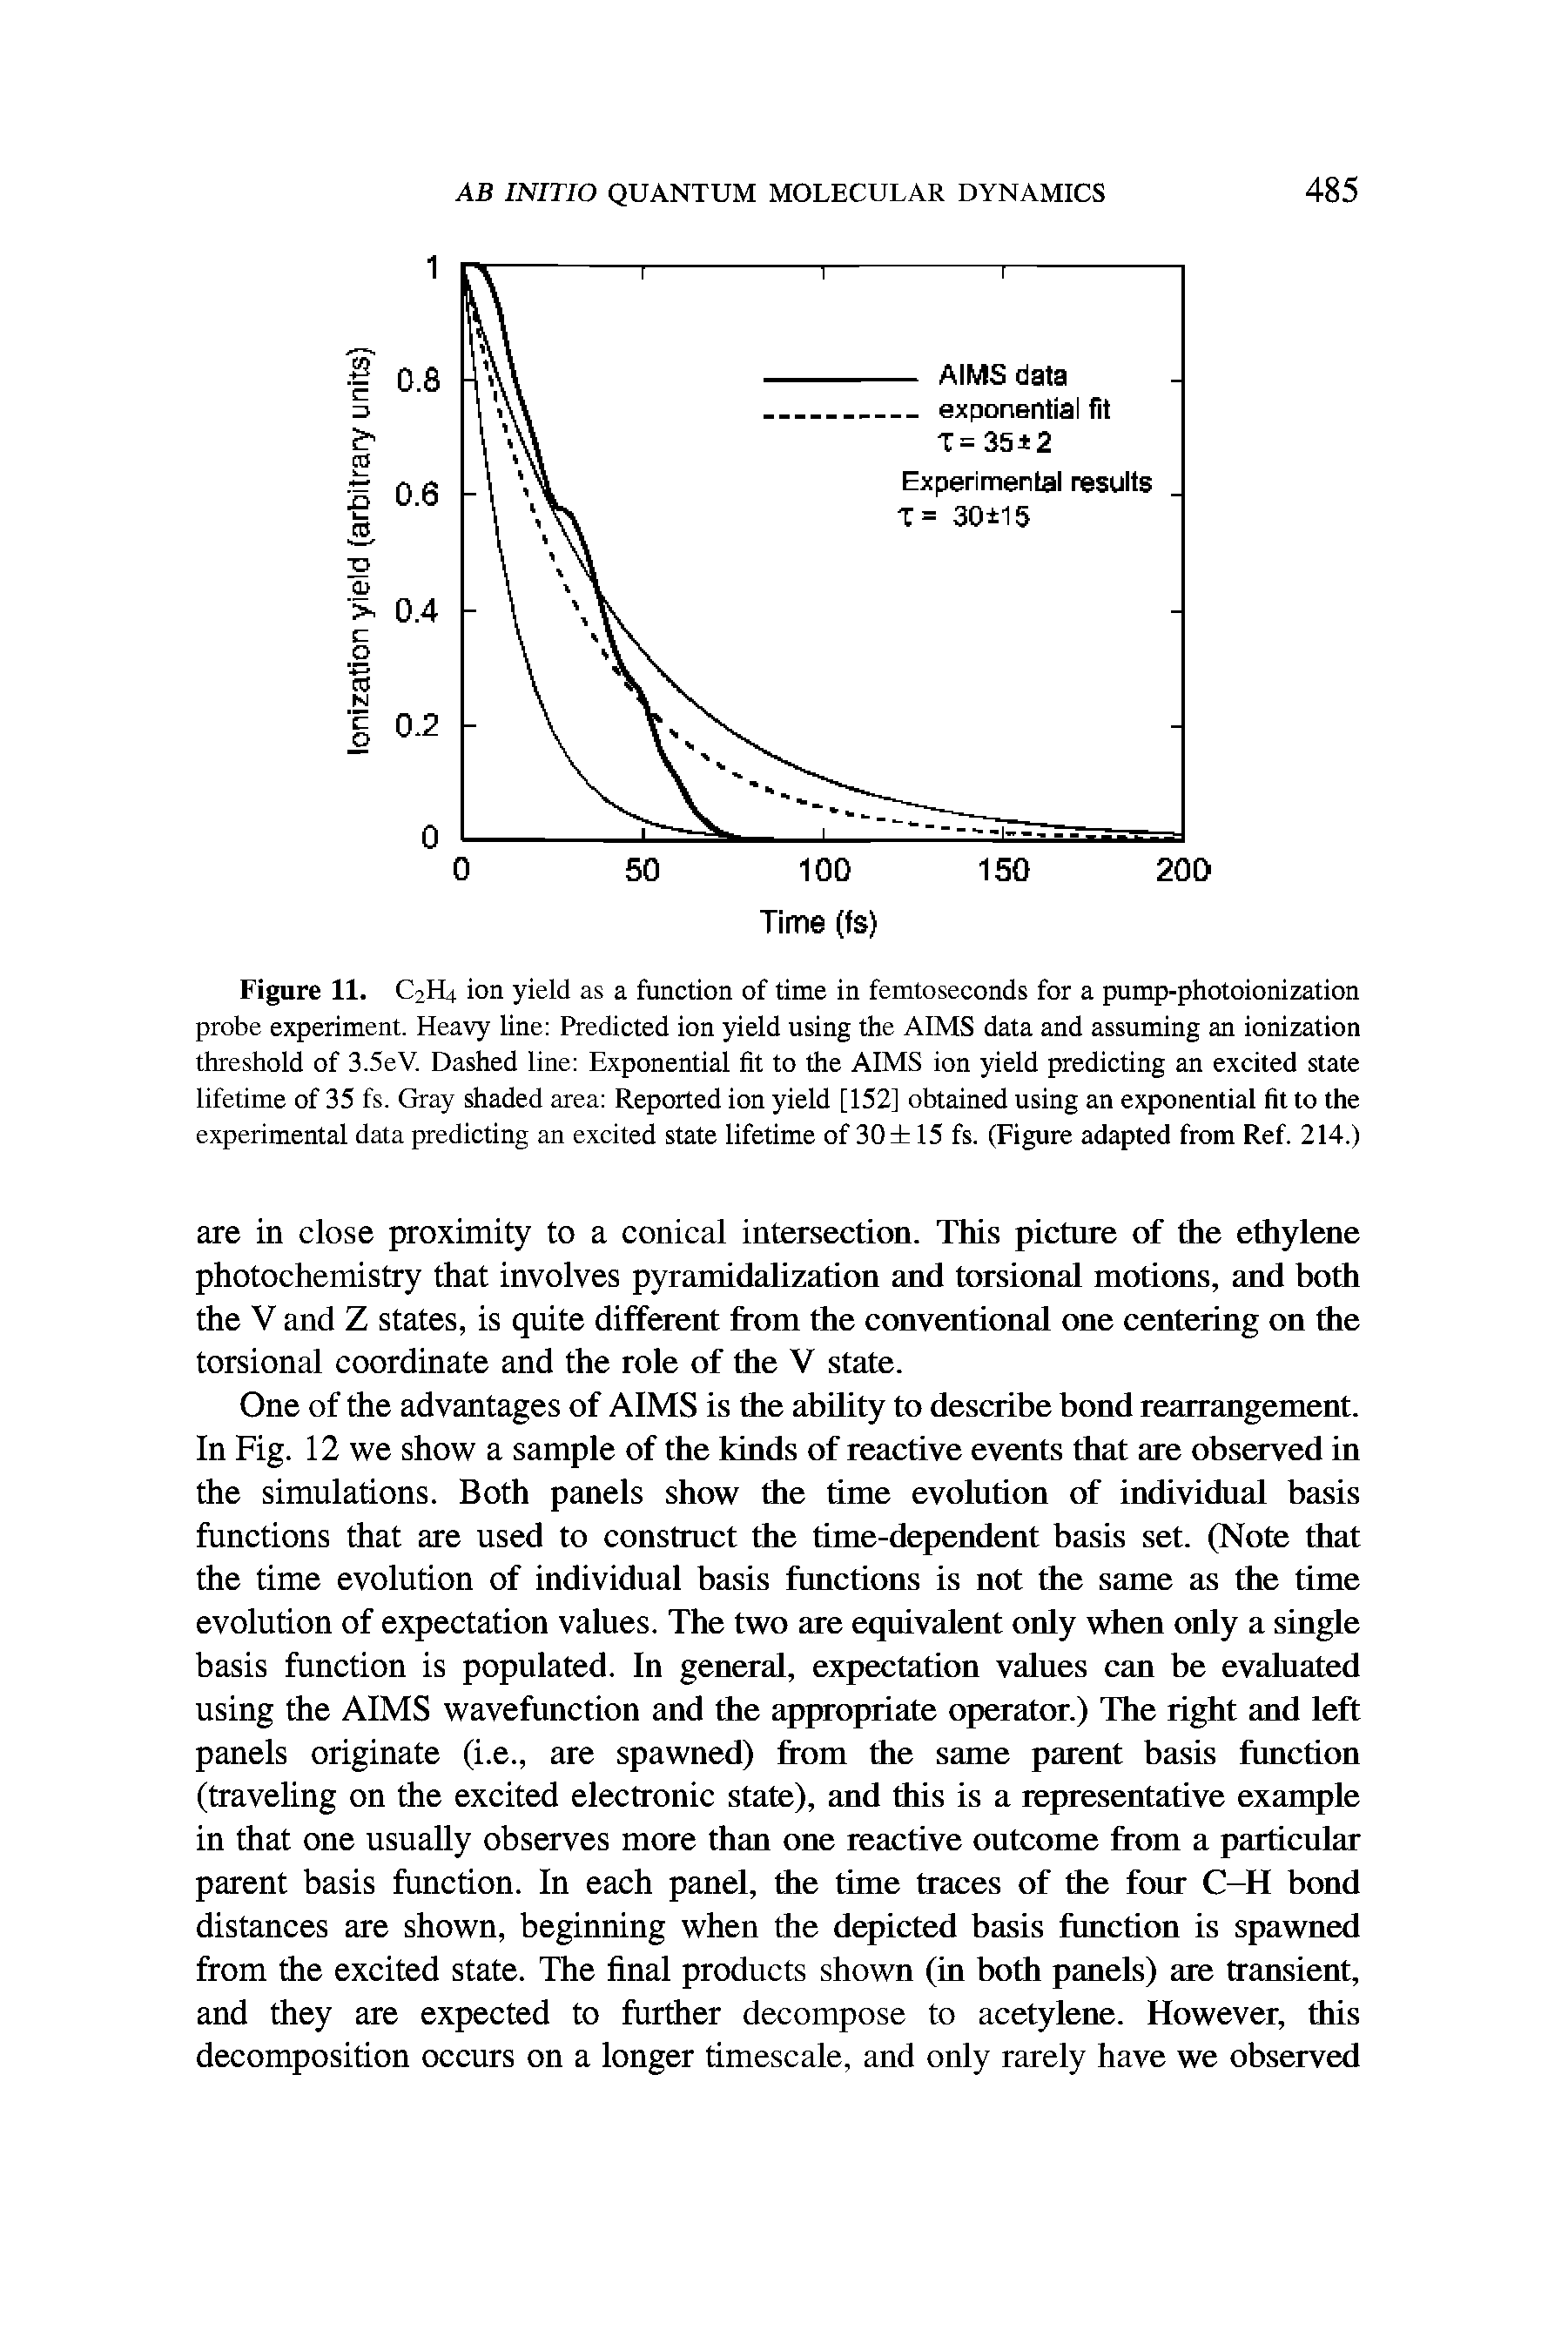 Figure 11. C2H4 ion yield as a function of time in femtoseconds for a pump-photoionization probe experiment. Heavy line Predicted ion yield using the AIMS data and assuming an ionization threshold of 3.5eV. Dashed line Exponential fit to the AIMS ion yield predicting an excited state lifetime of 35 fs. Gray shaded area Reported ion yield [152] obtained using an exponential fit to the experimental data predicting an excited state lifetime of 30 15 fs. (Figure adapted from Ref. 214.)...